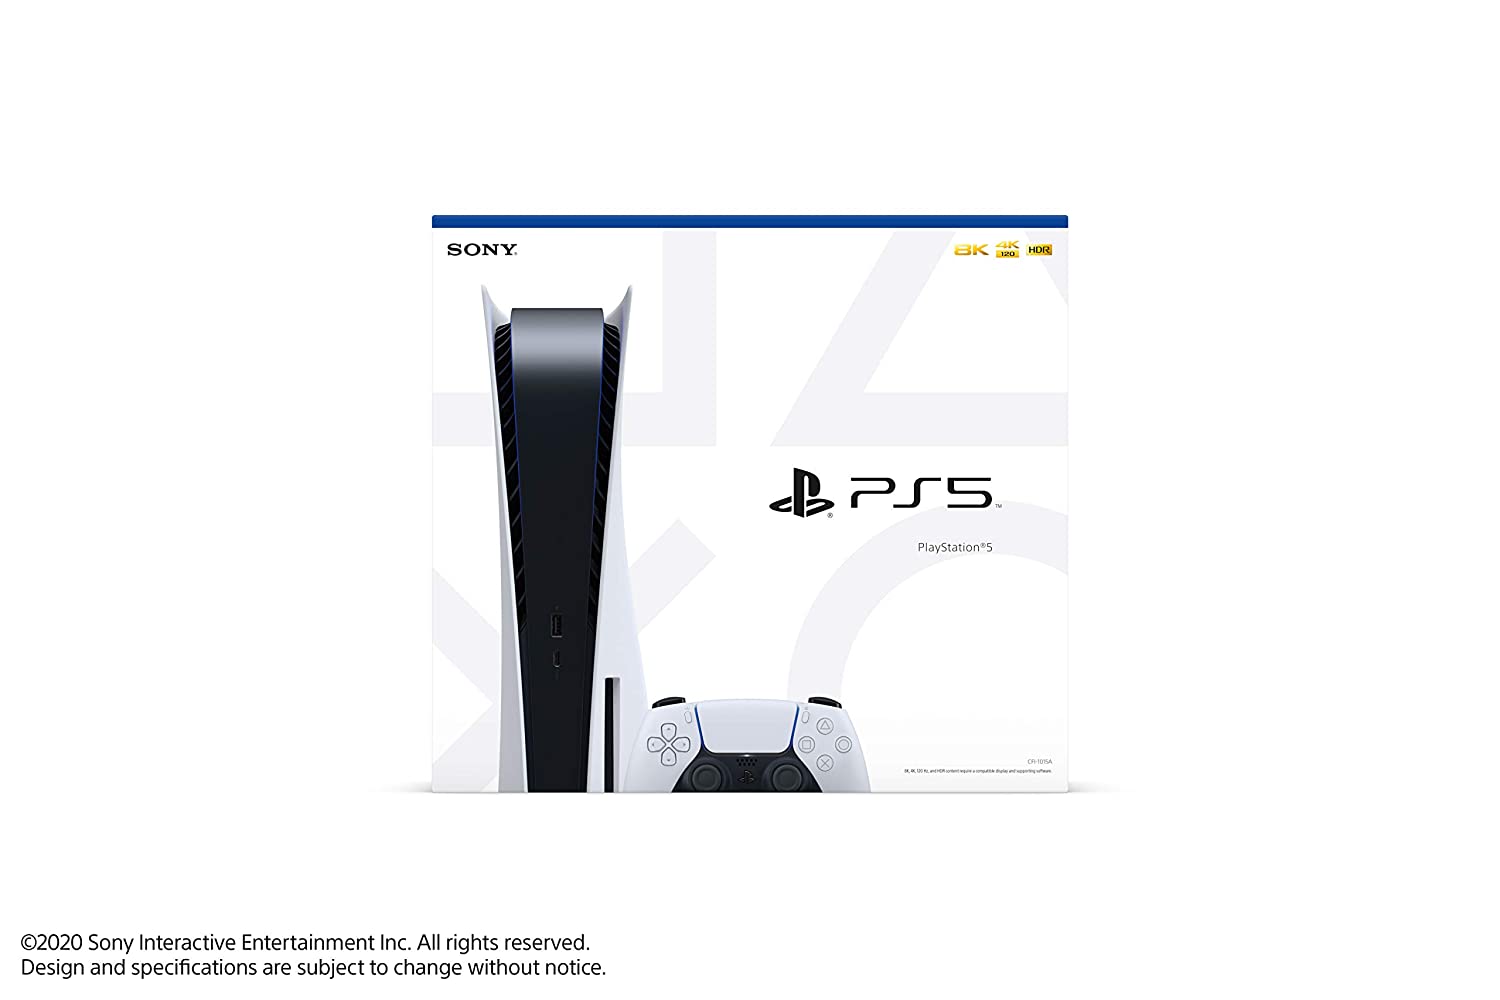 Sony Playstation 5 Disc Version with Extra DualSense Controller, Charging Station and Microfiber Cleaning Cloth - Pro-Distributing